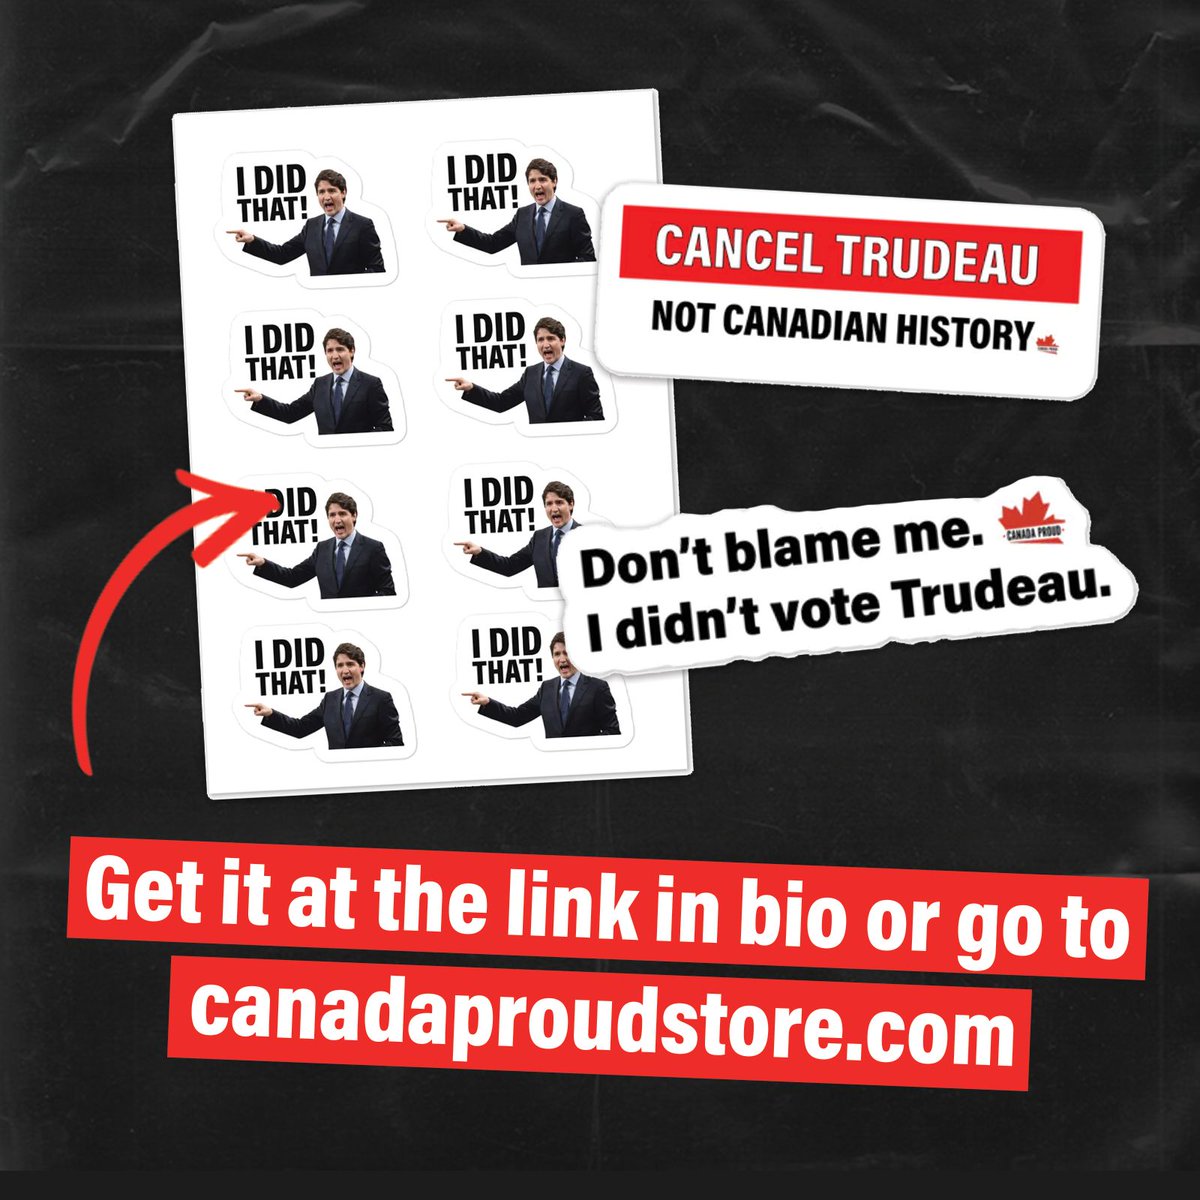 Want a sticker? Go to CanadaProudStore.com and shop today!